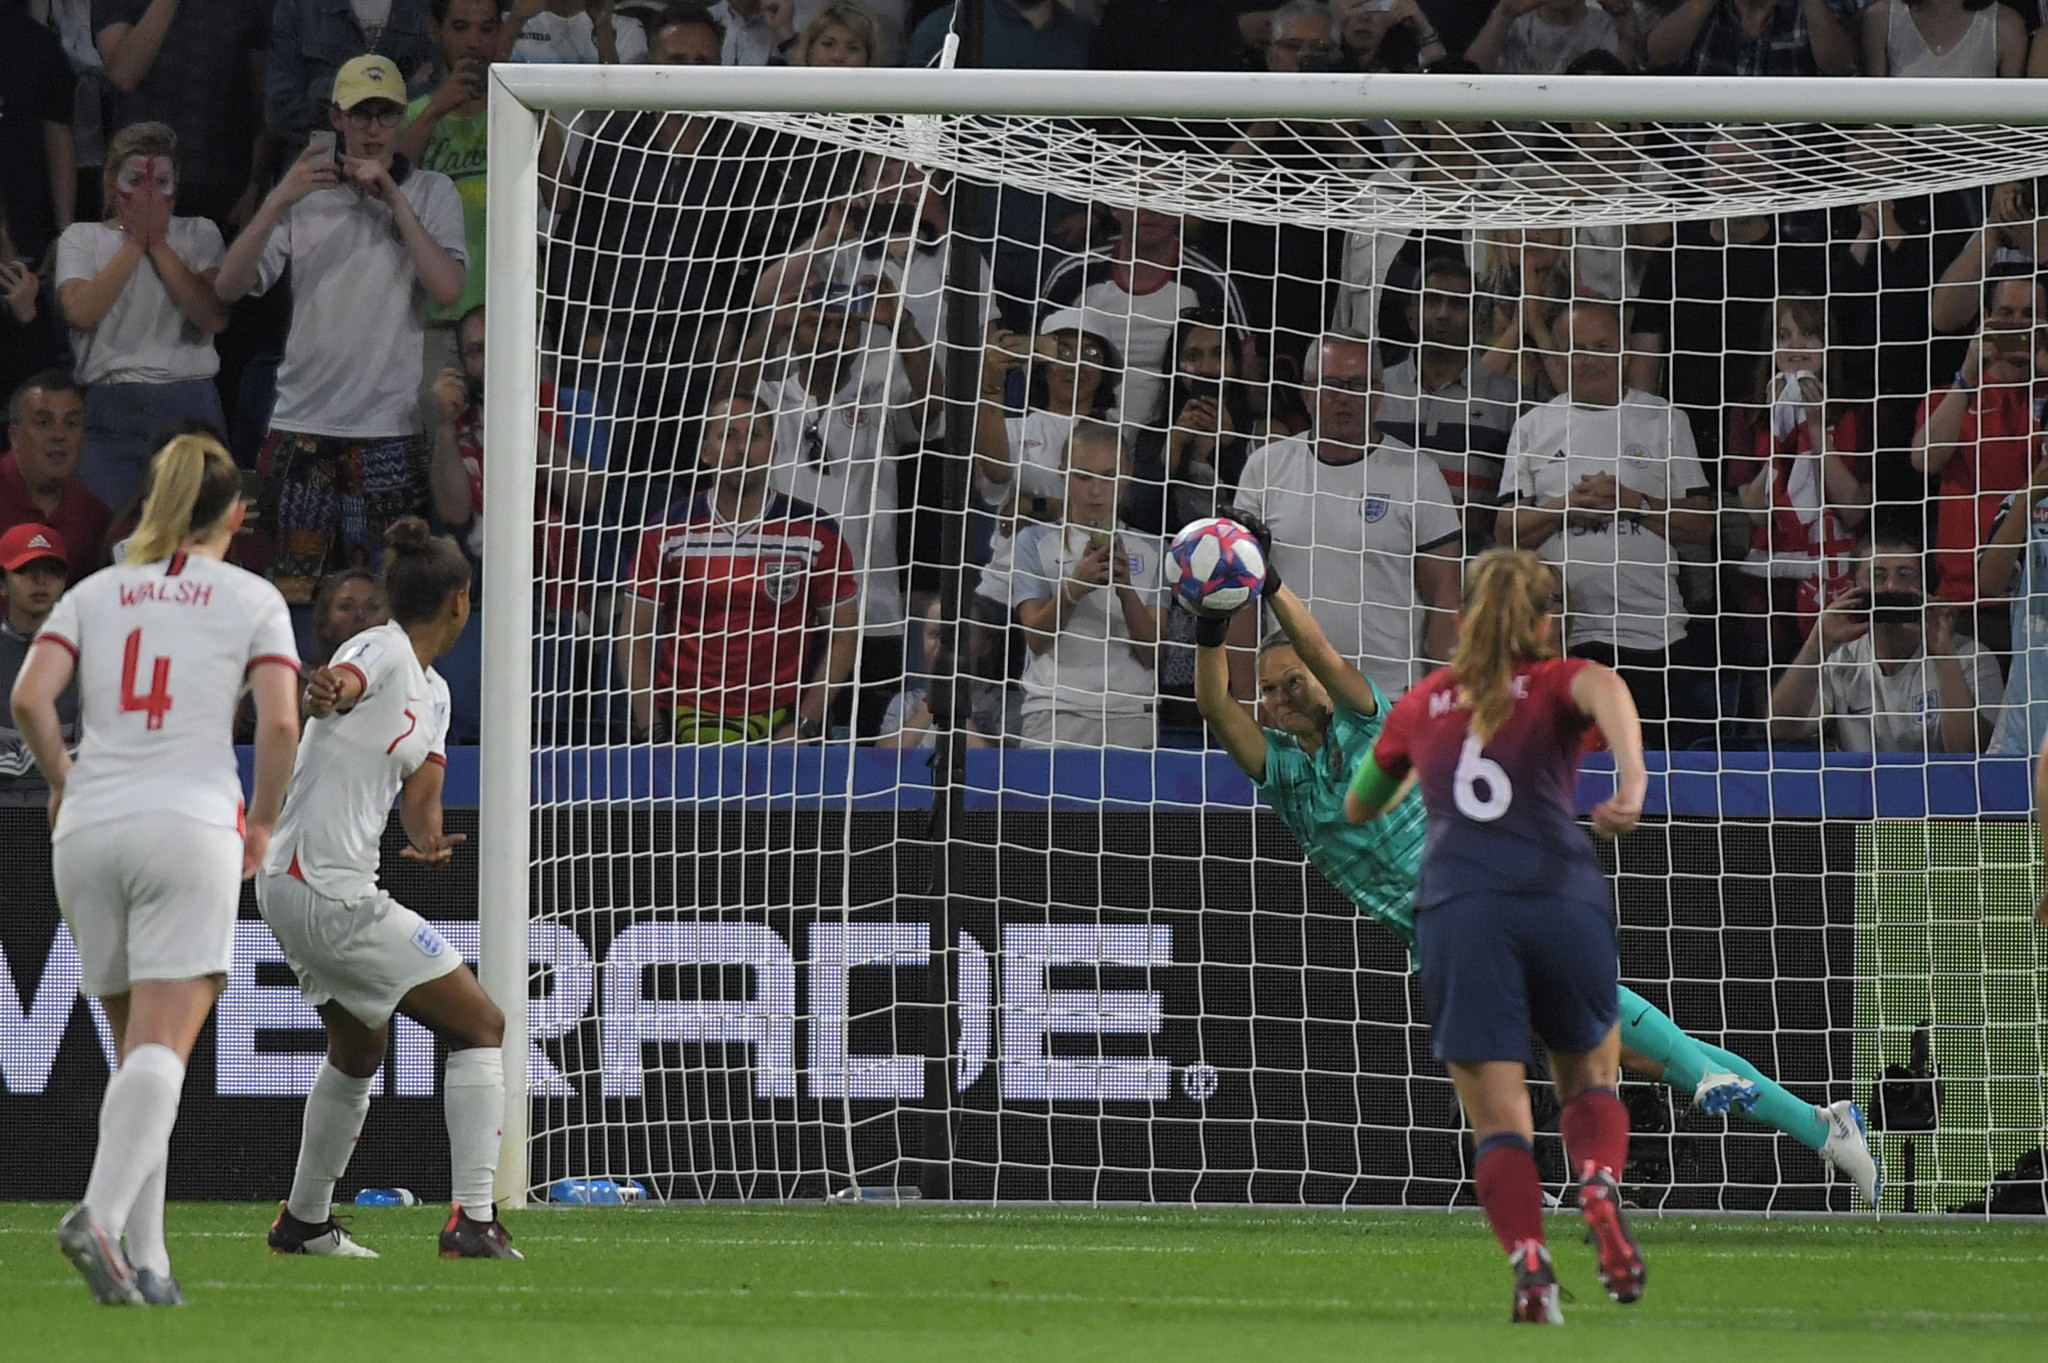 Nikita Parris missed her second penalty of the tournament in the closing stages ©Getty Images